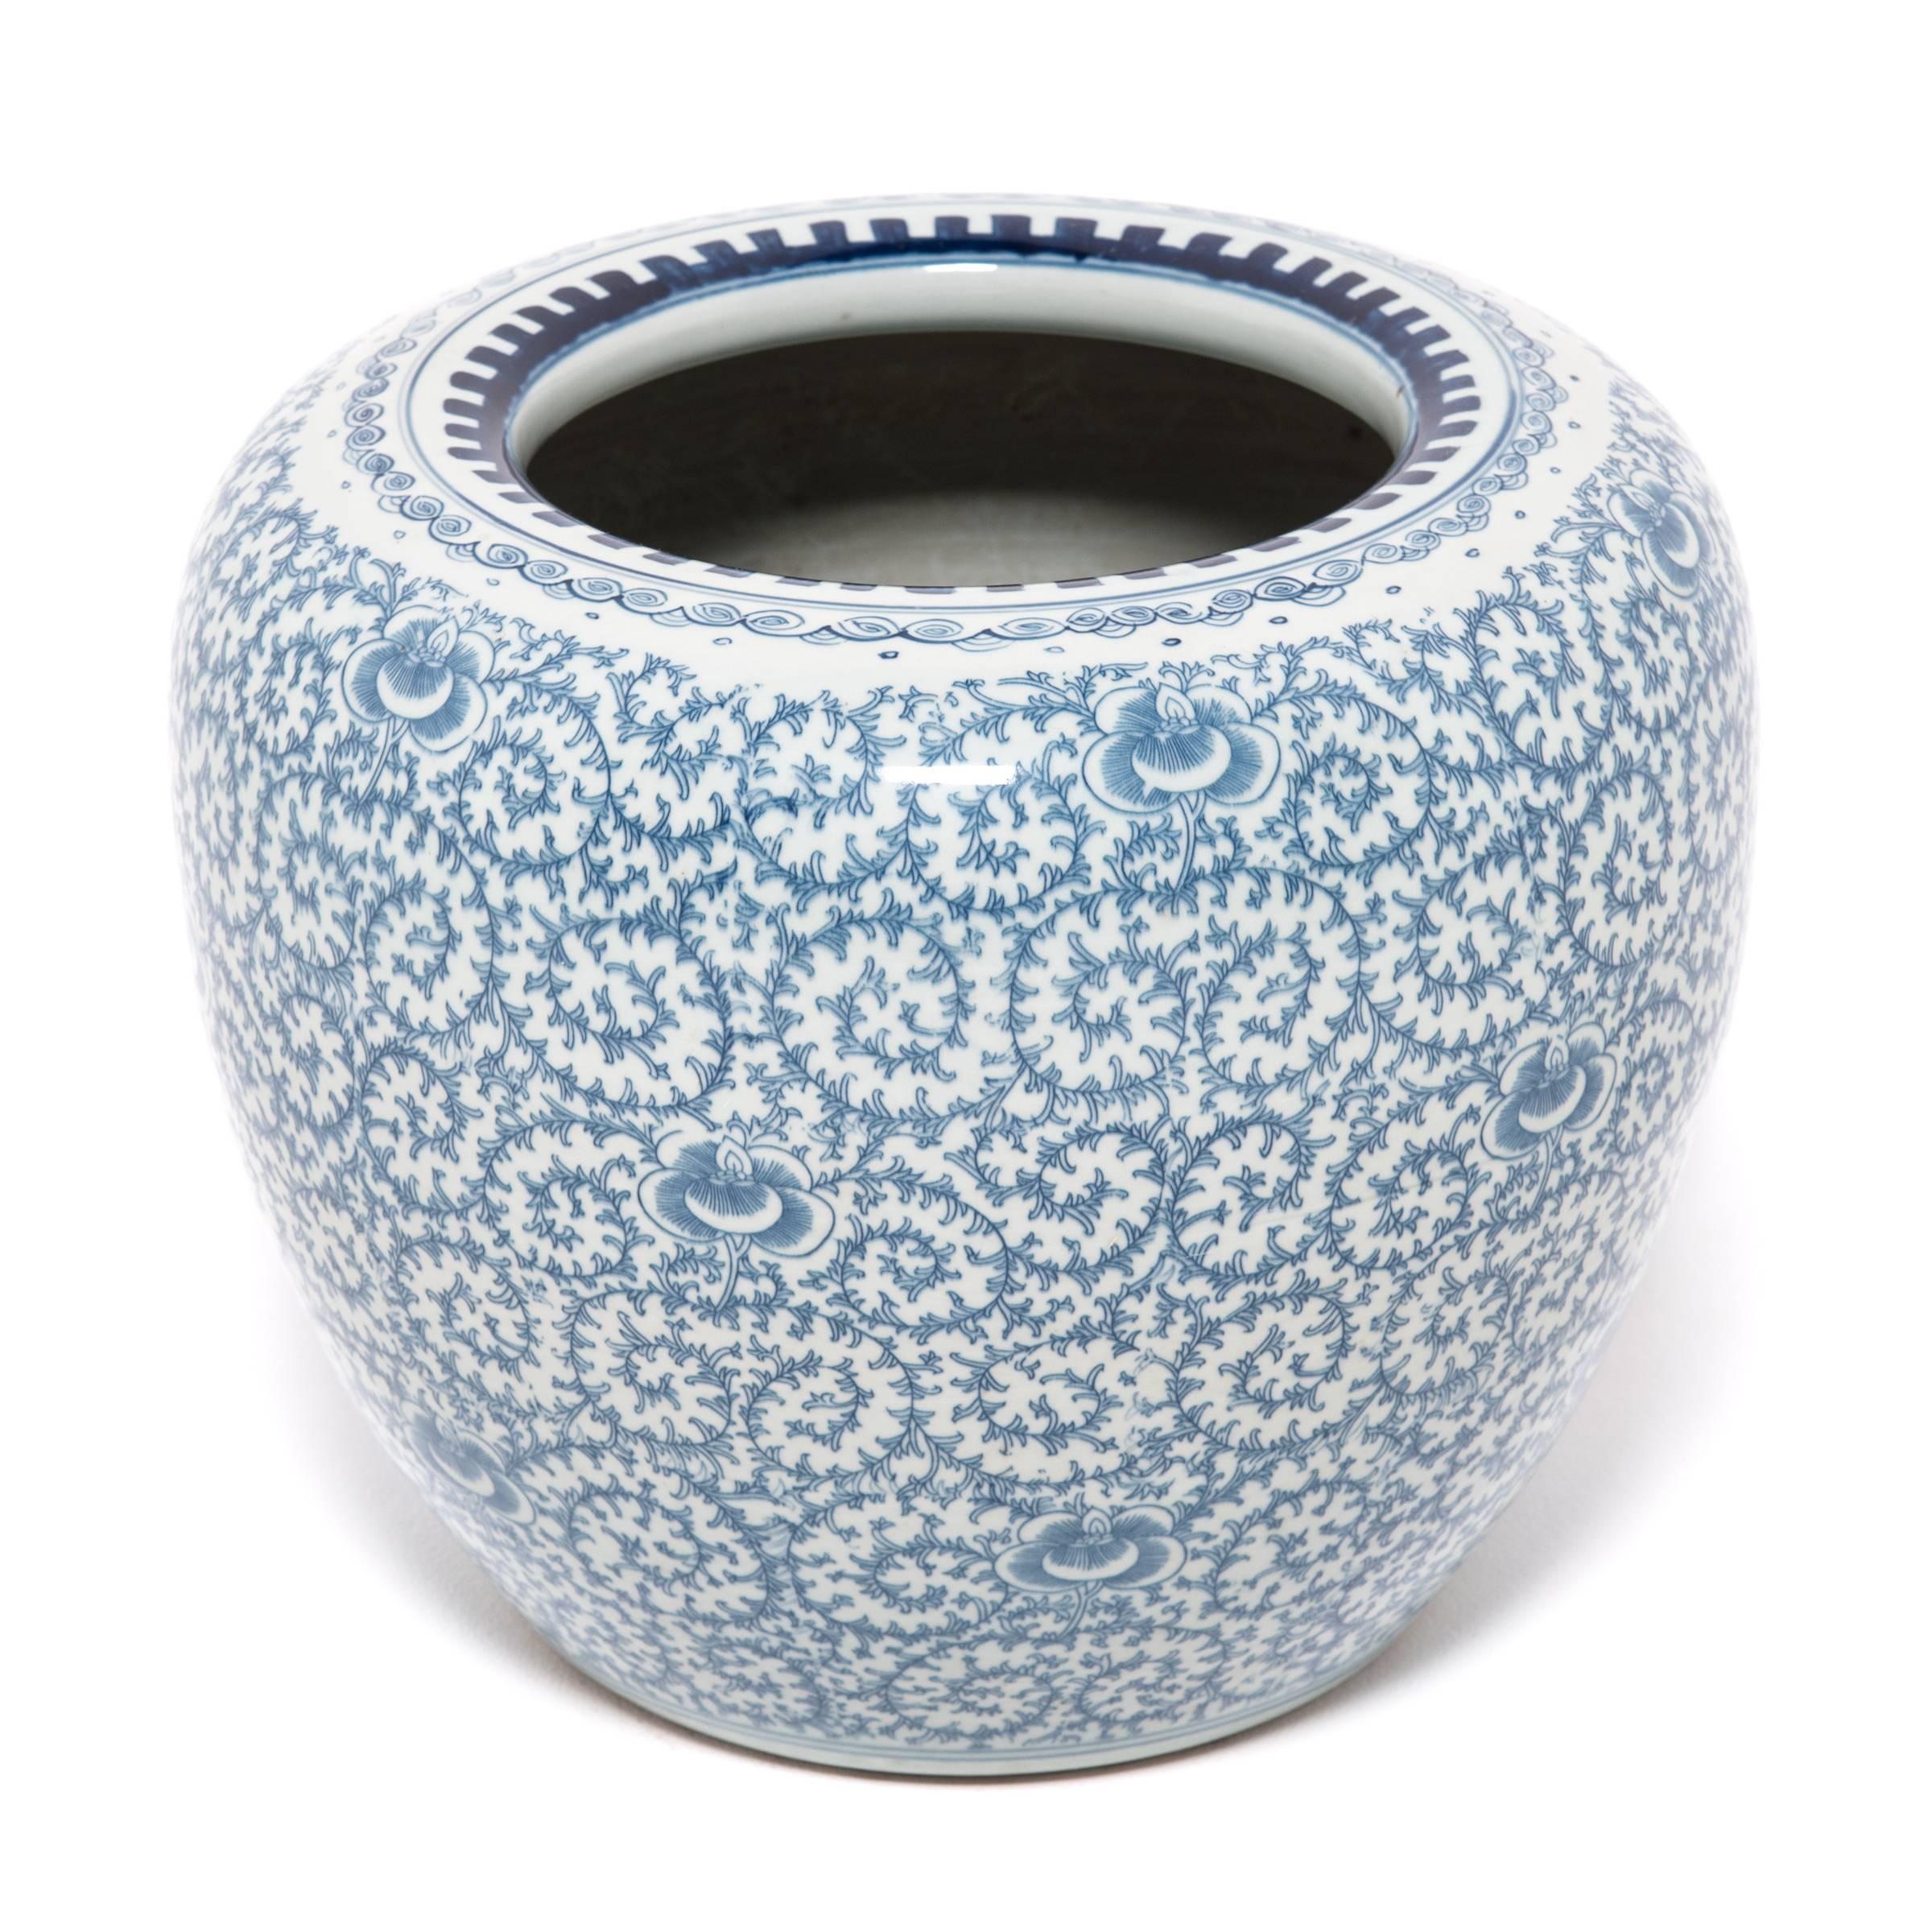 A brilliant example of traditional blue-and-white porcelain, this exquisitely decorated bowl begs close inspection to appreciate its intricate vine detail. Punctuated with the occasional violet-like bloom, the decoration possesses a lively rhythm